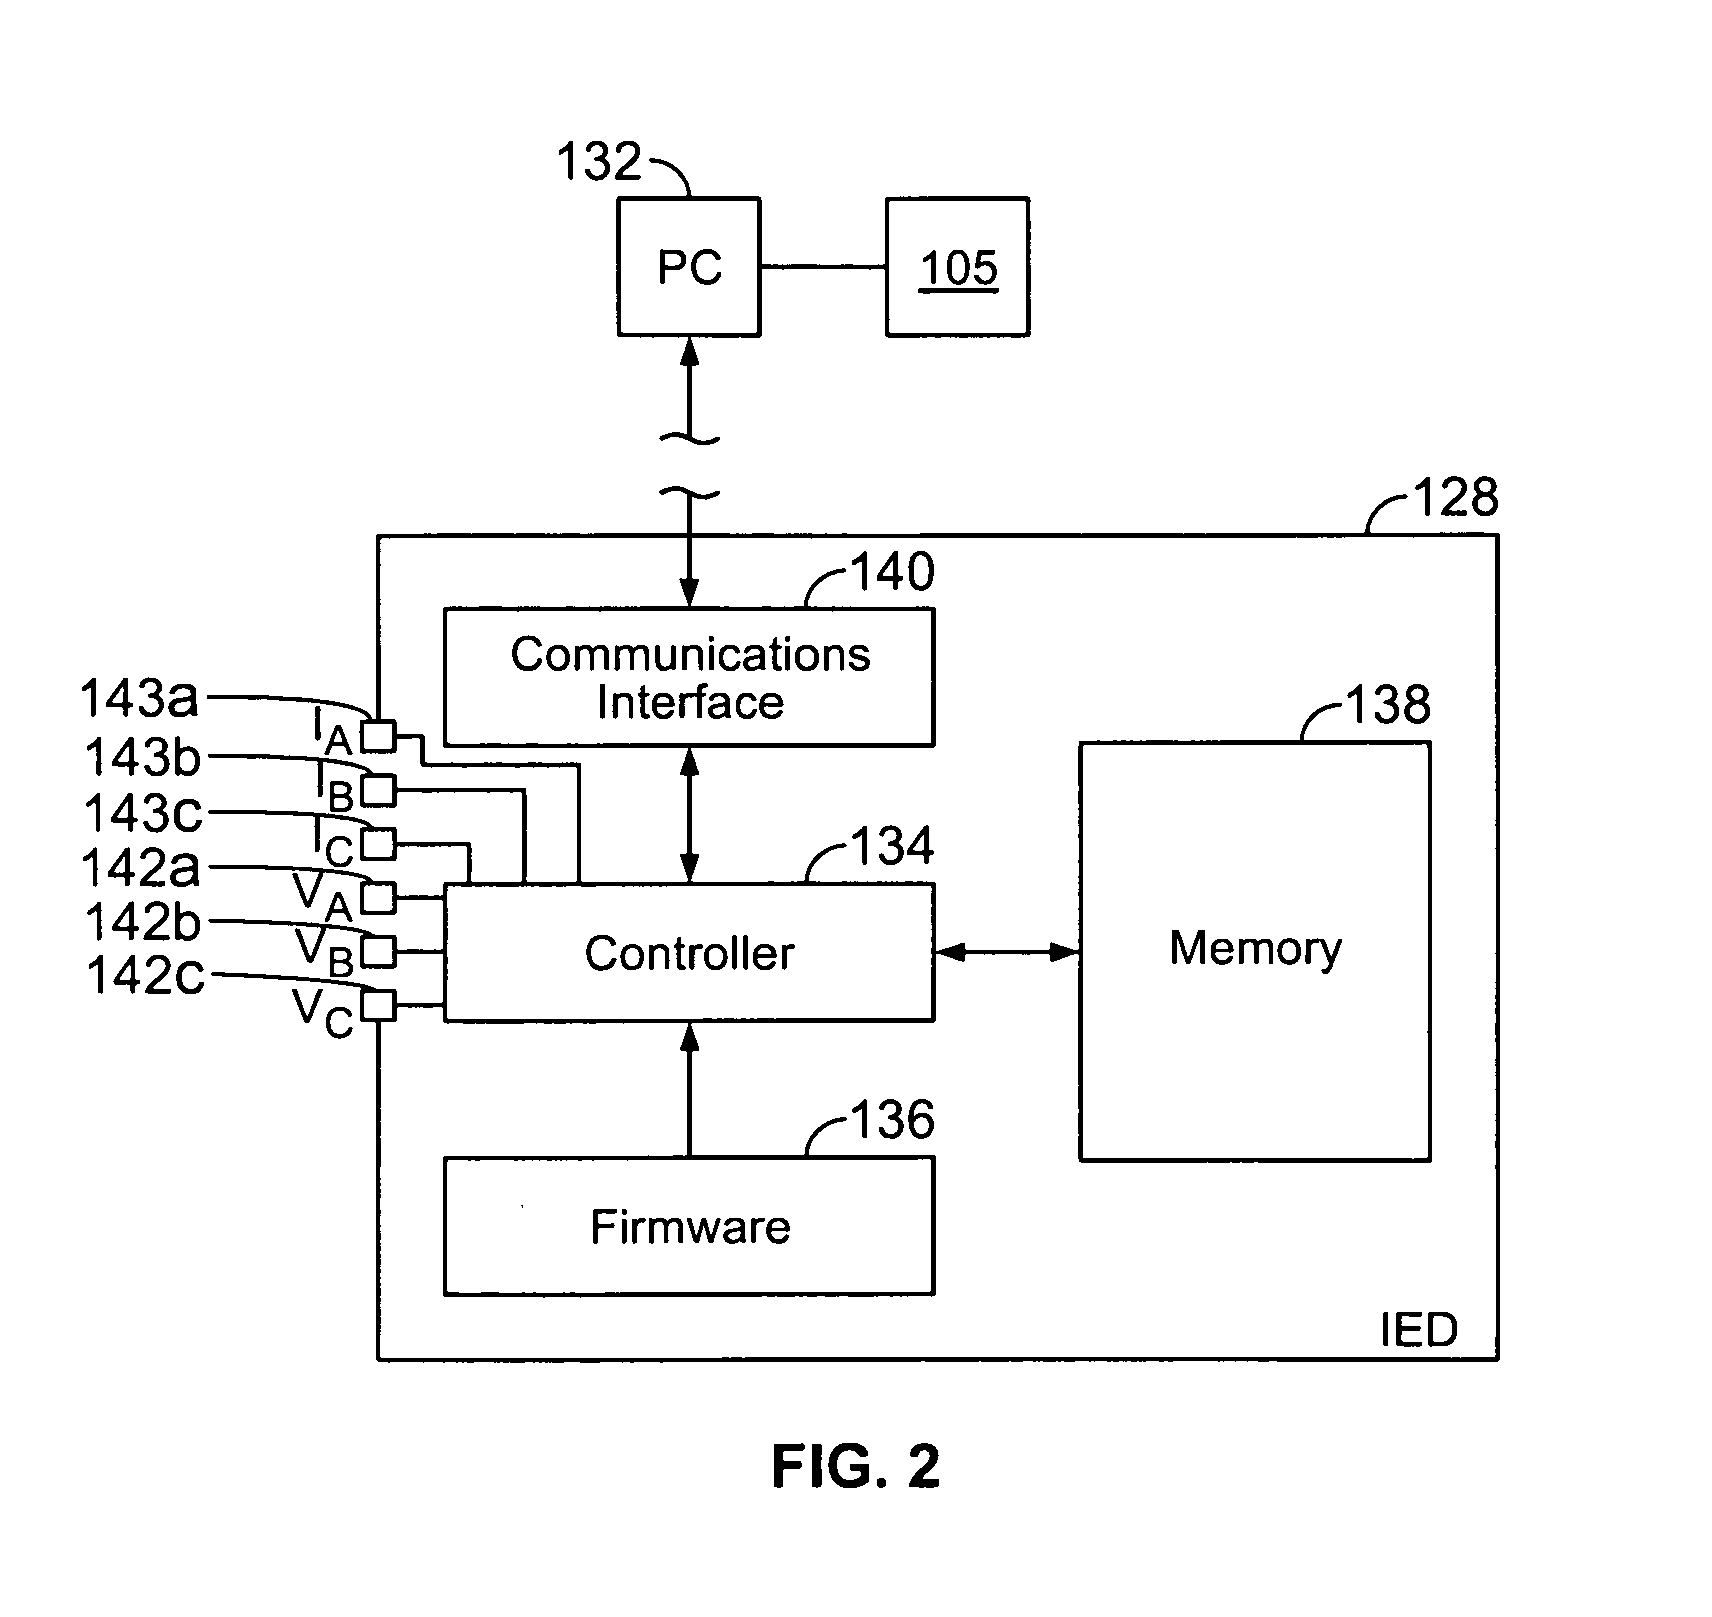 Automated voltage analysis in an electrical system using contextual data